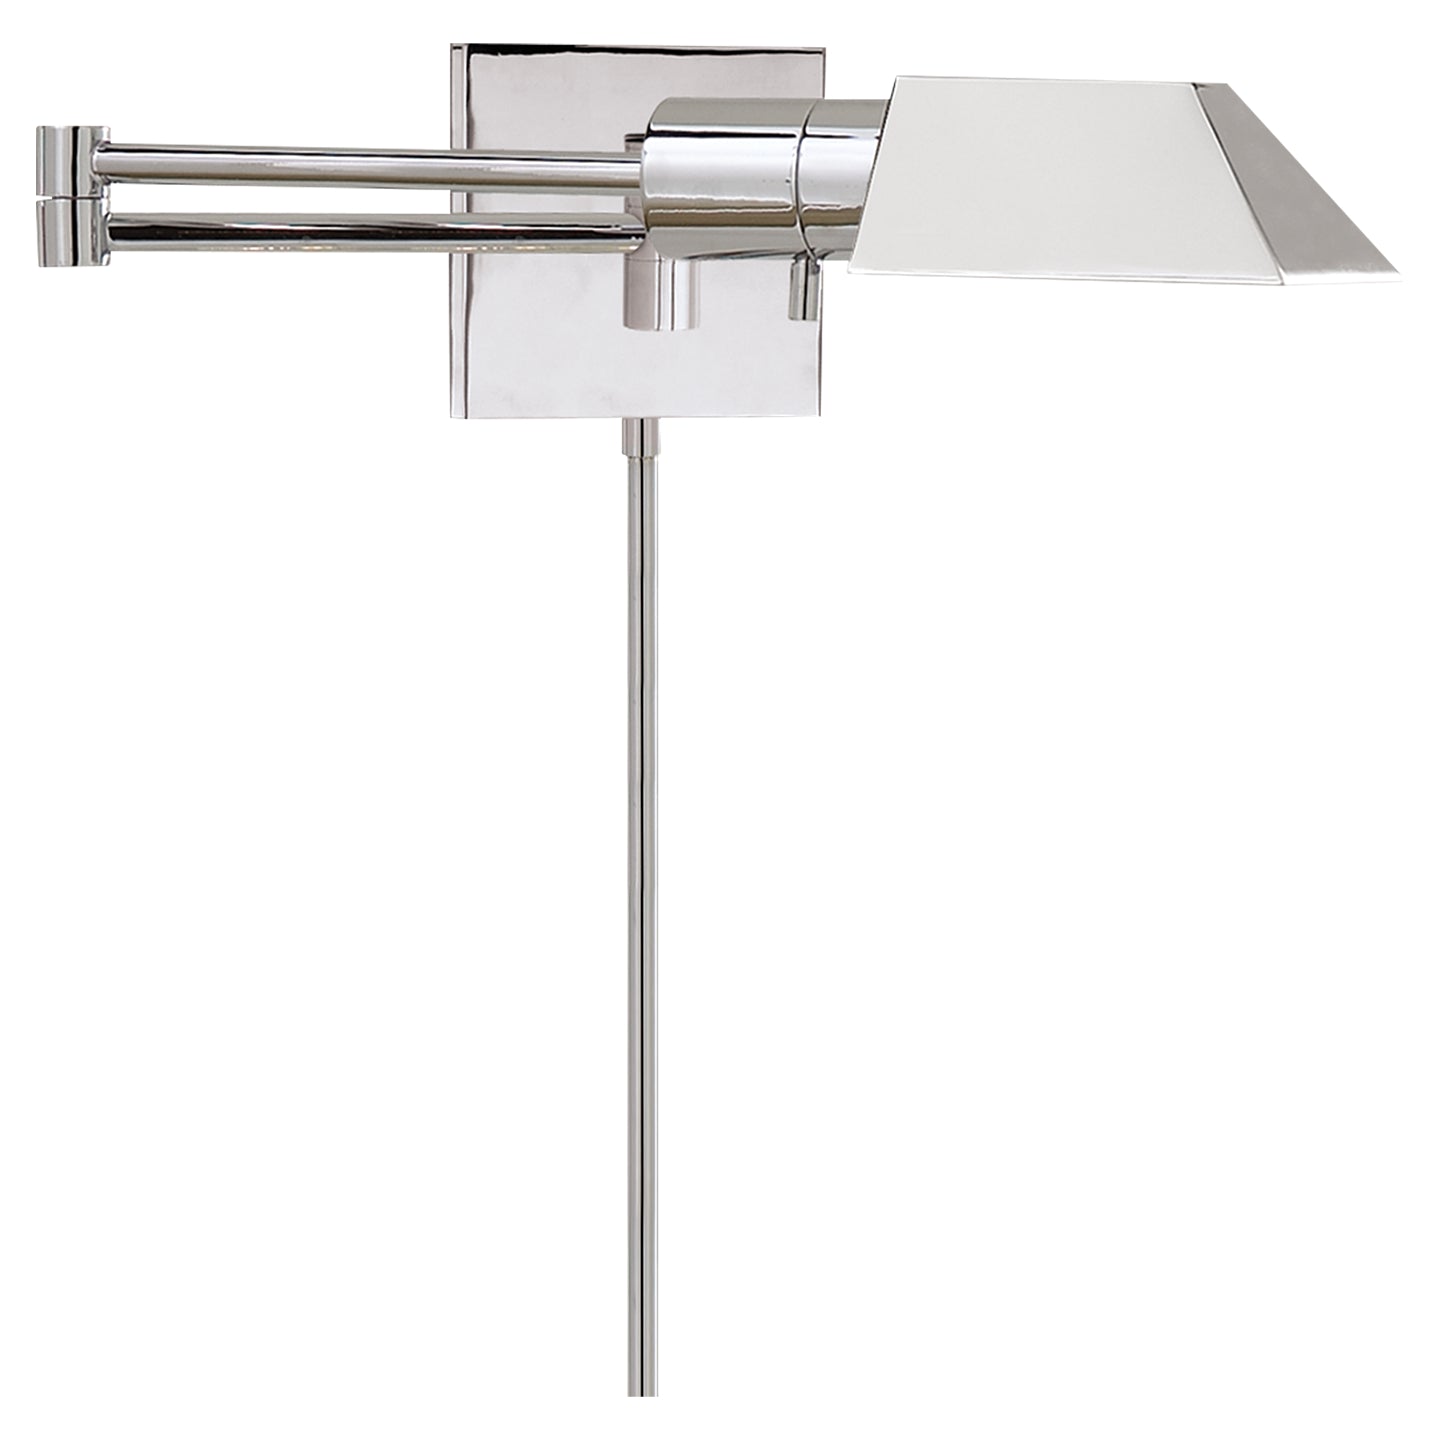 Visual Comfort Signature - 82034 PN - One Light Swing Arm Wall Lamp - VC CLASSIC - Polished Nickel